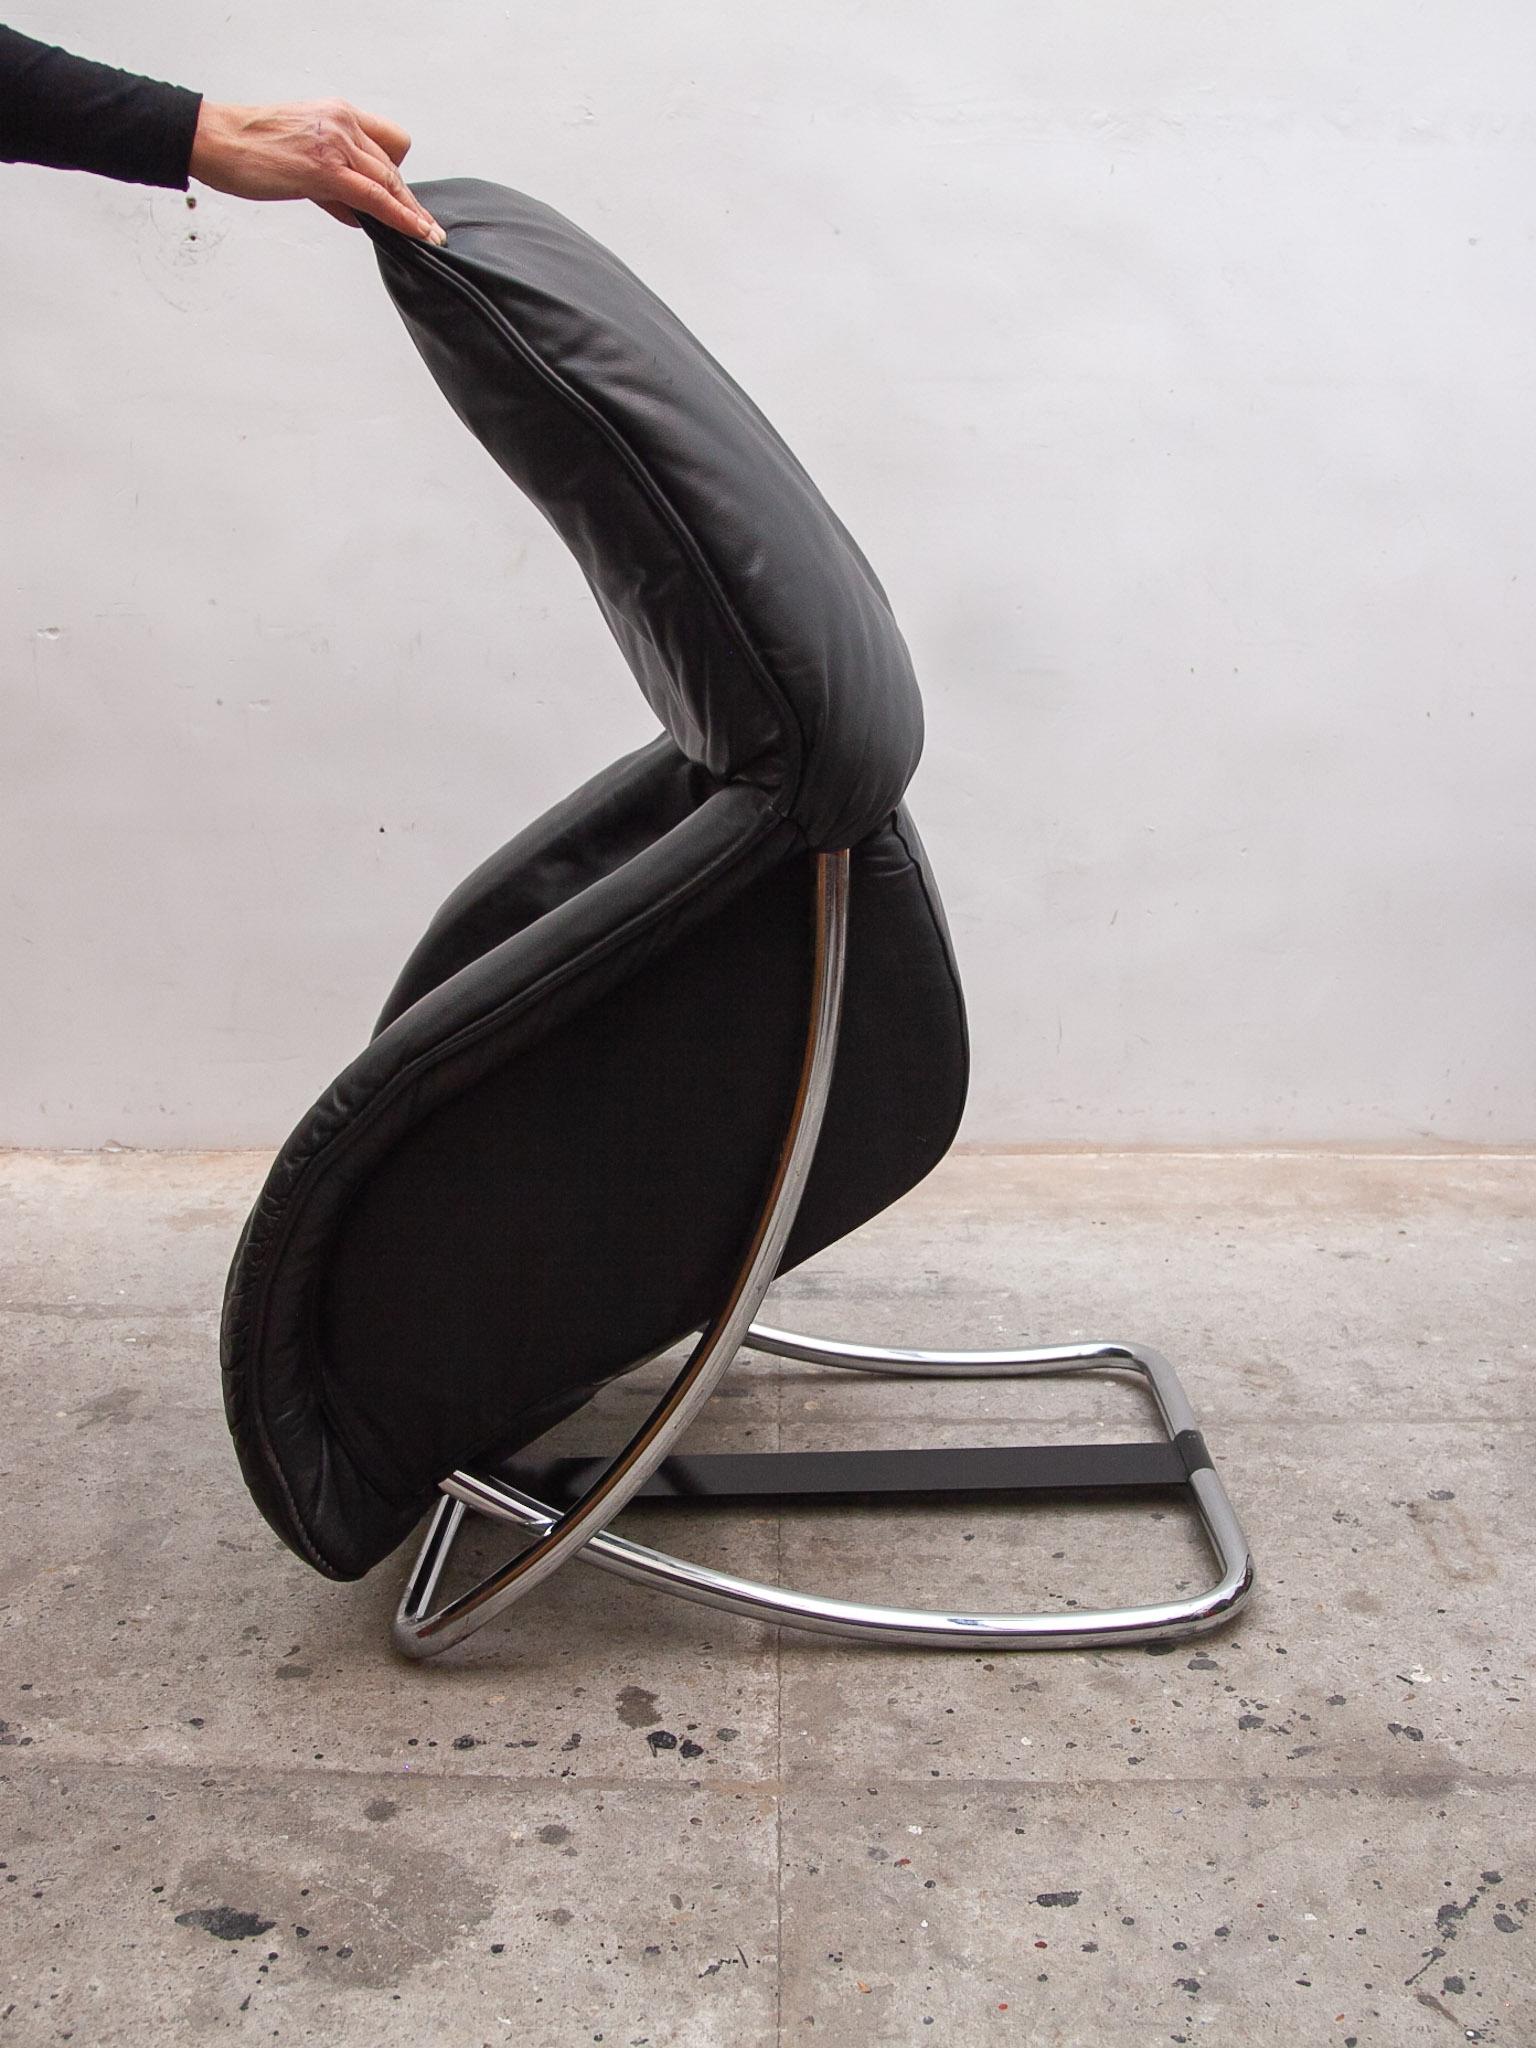 Leather Robert Haussmann Style Chrome Rocking Lounge Chair with Footstool, 1980s For Sale